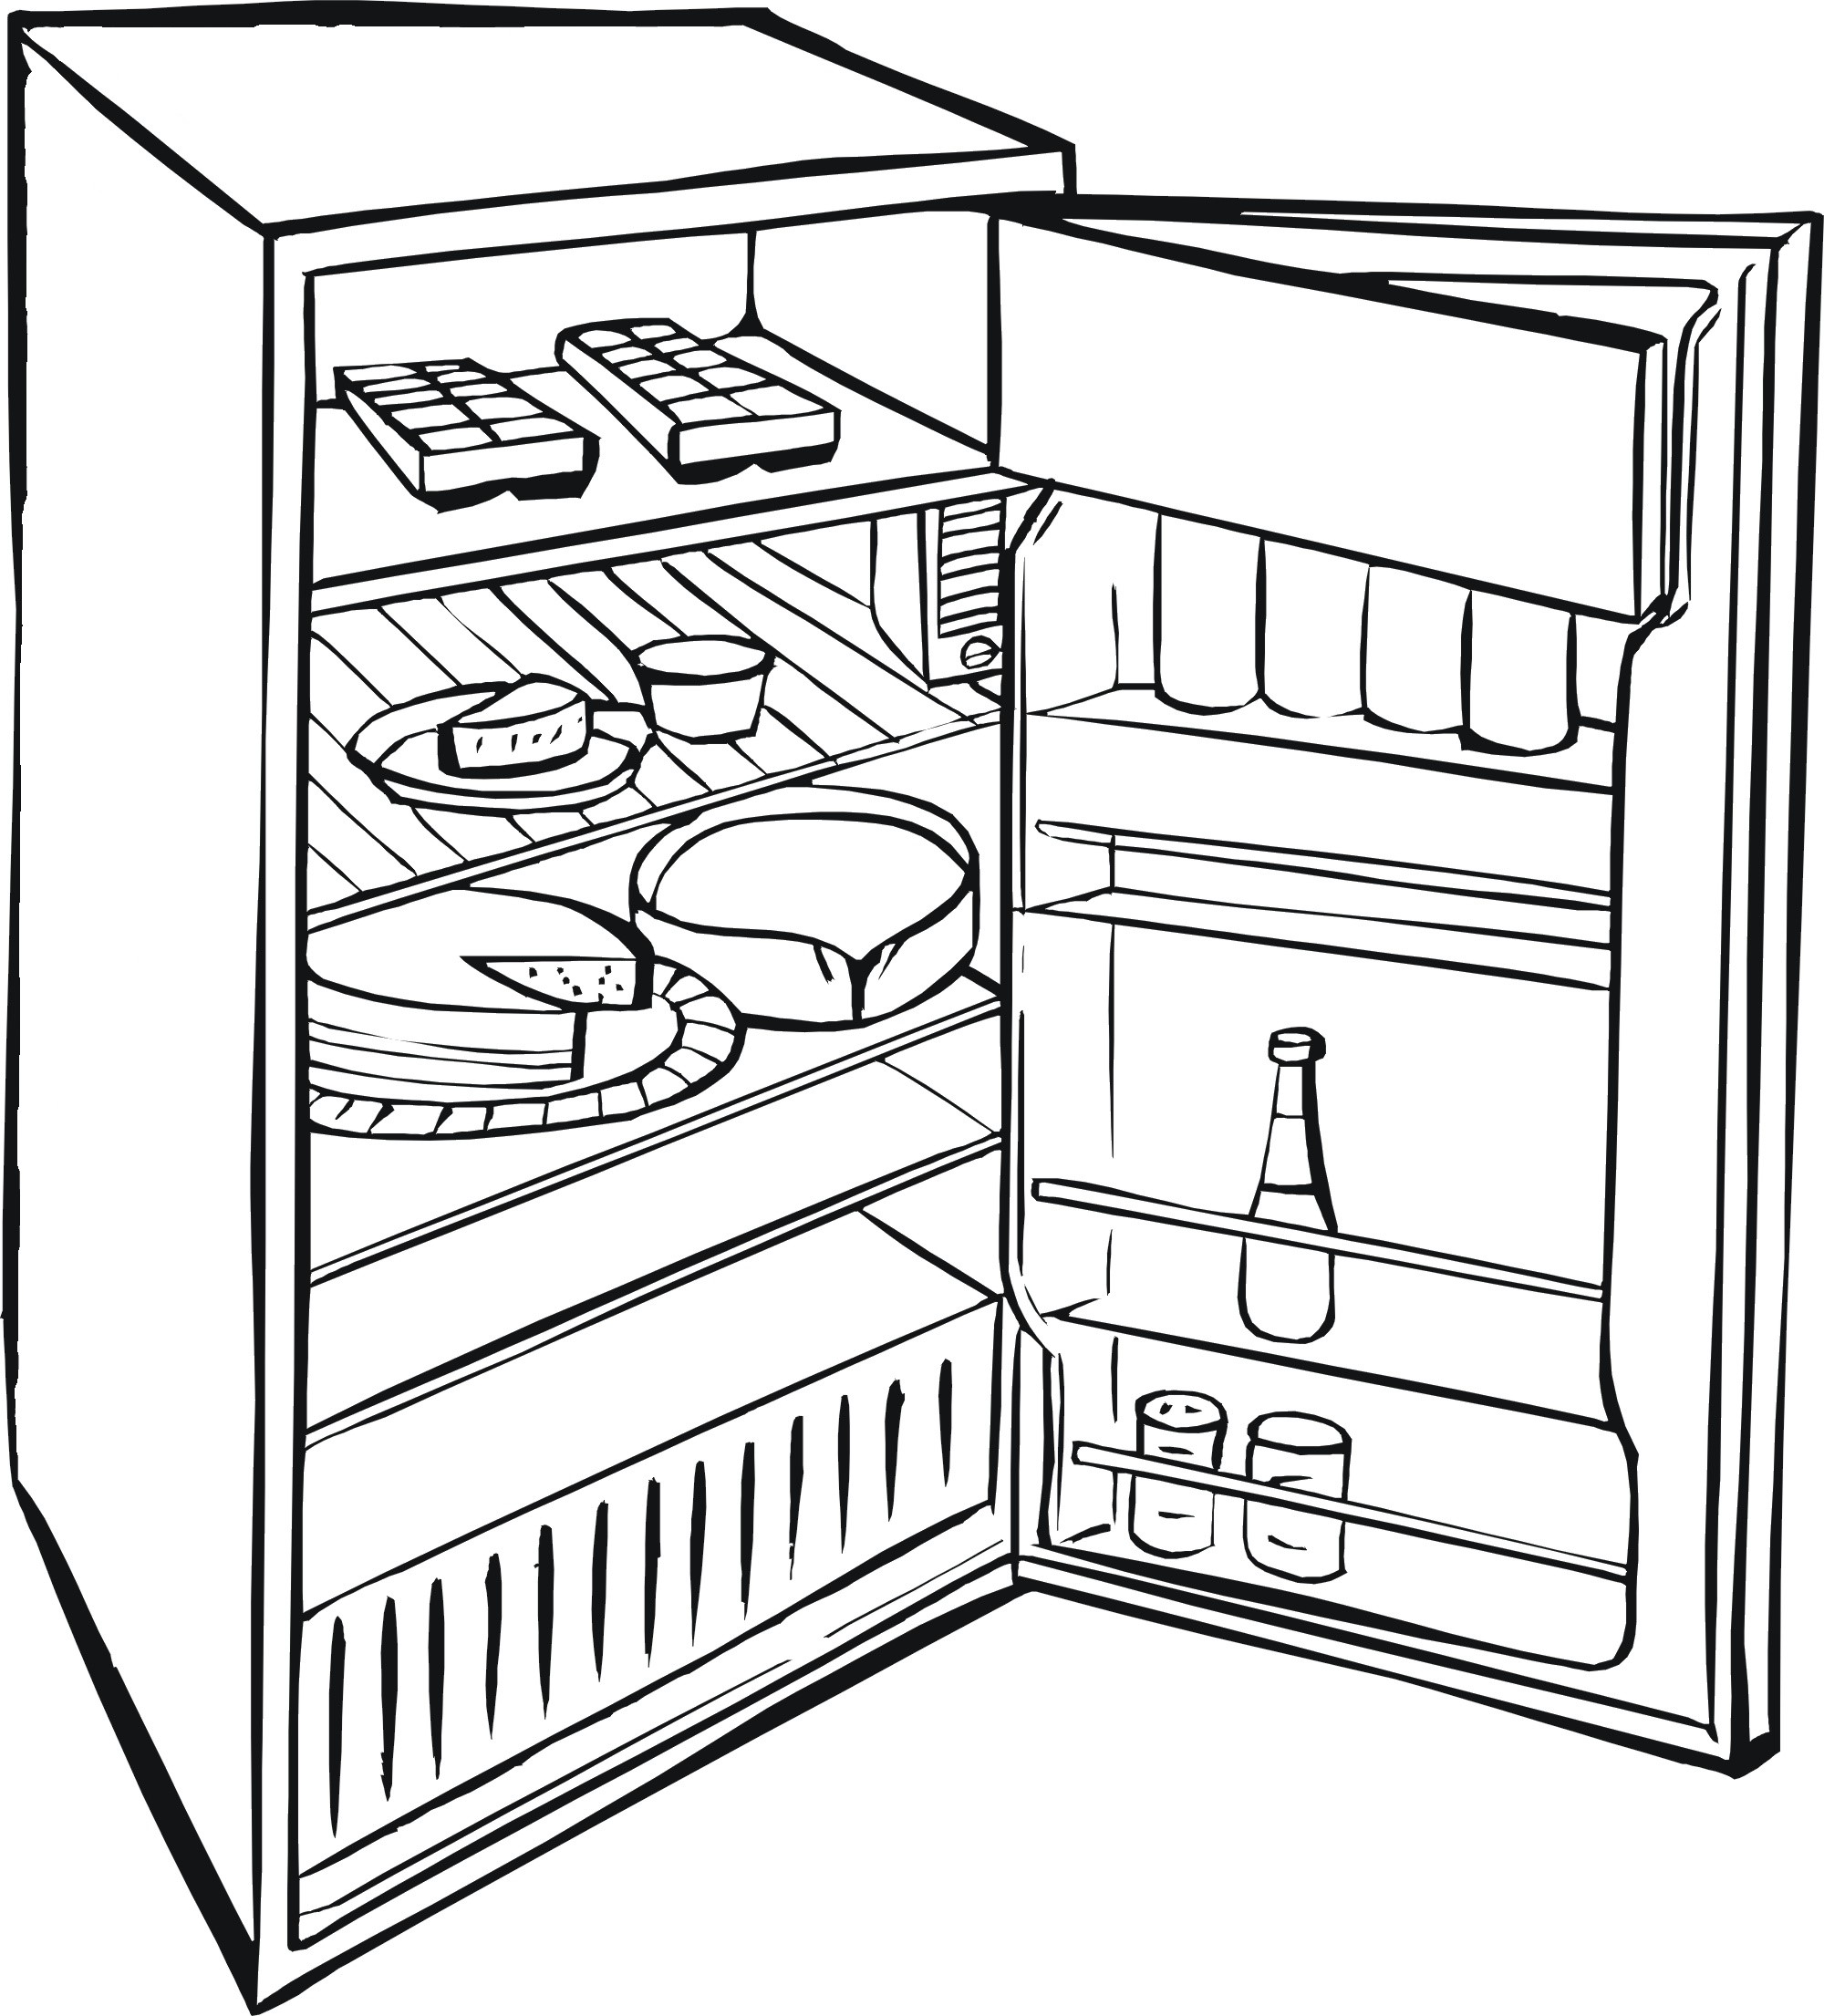 30+ Top For Easy Open Refrigerator Drawing